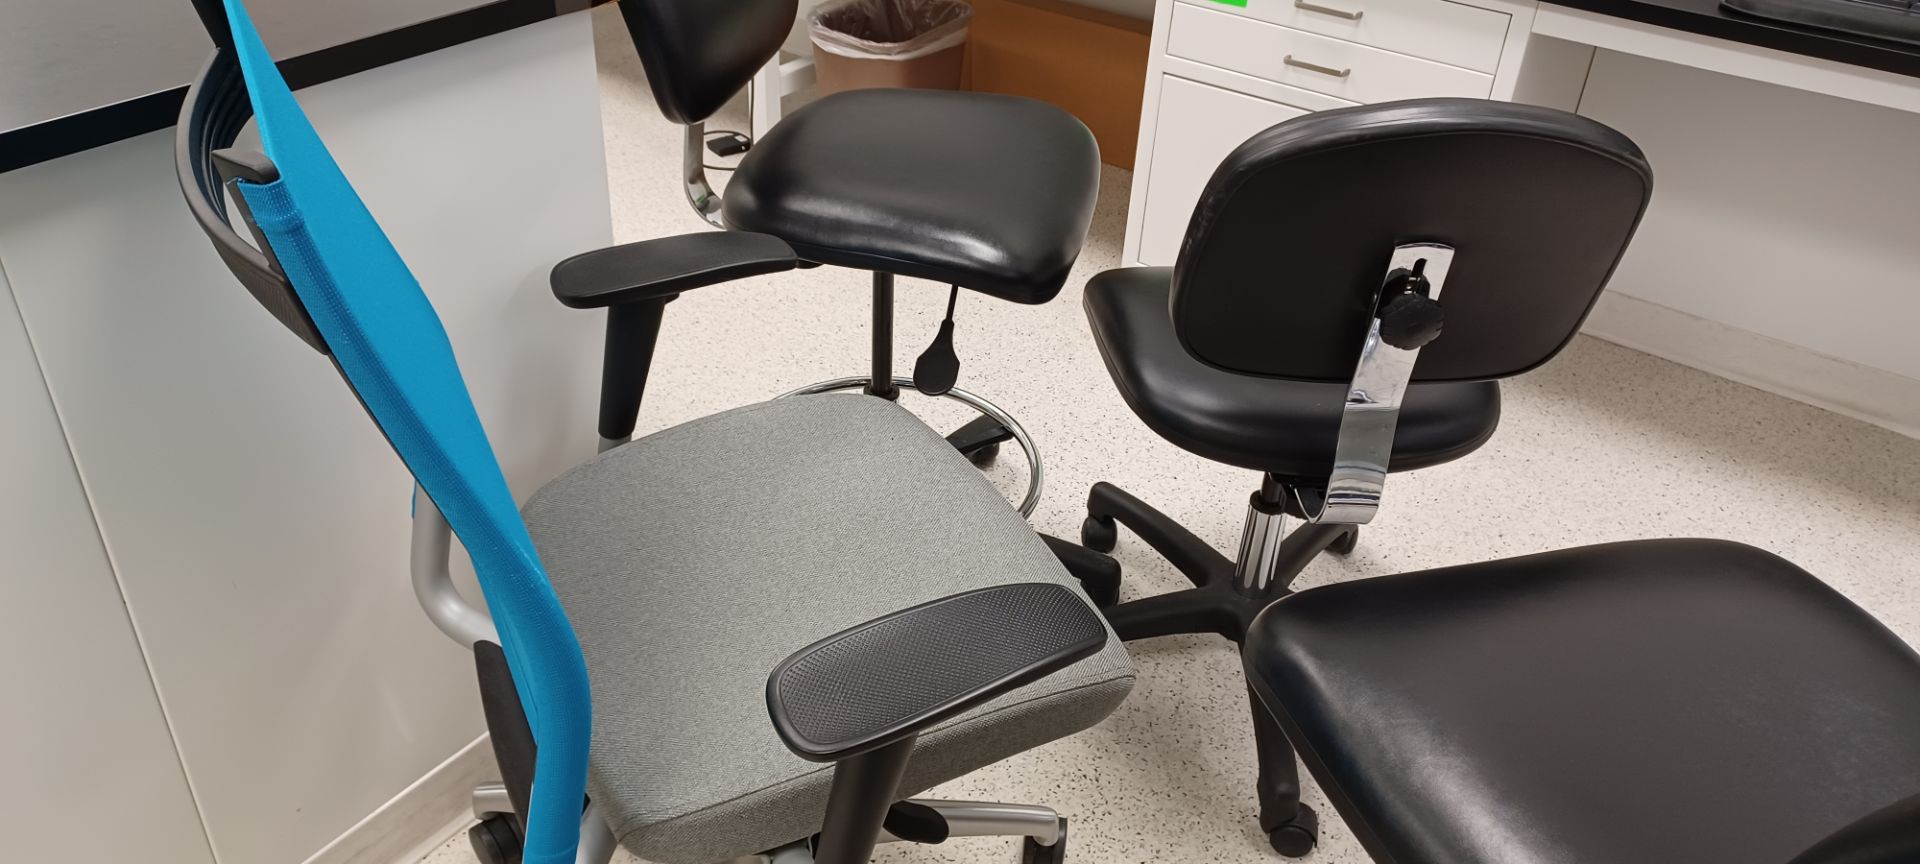 LOT OF 5 LAB CHAIRS - Image 2 of 3